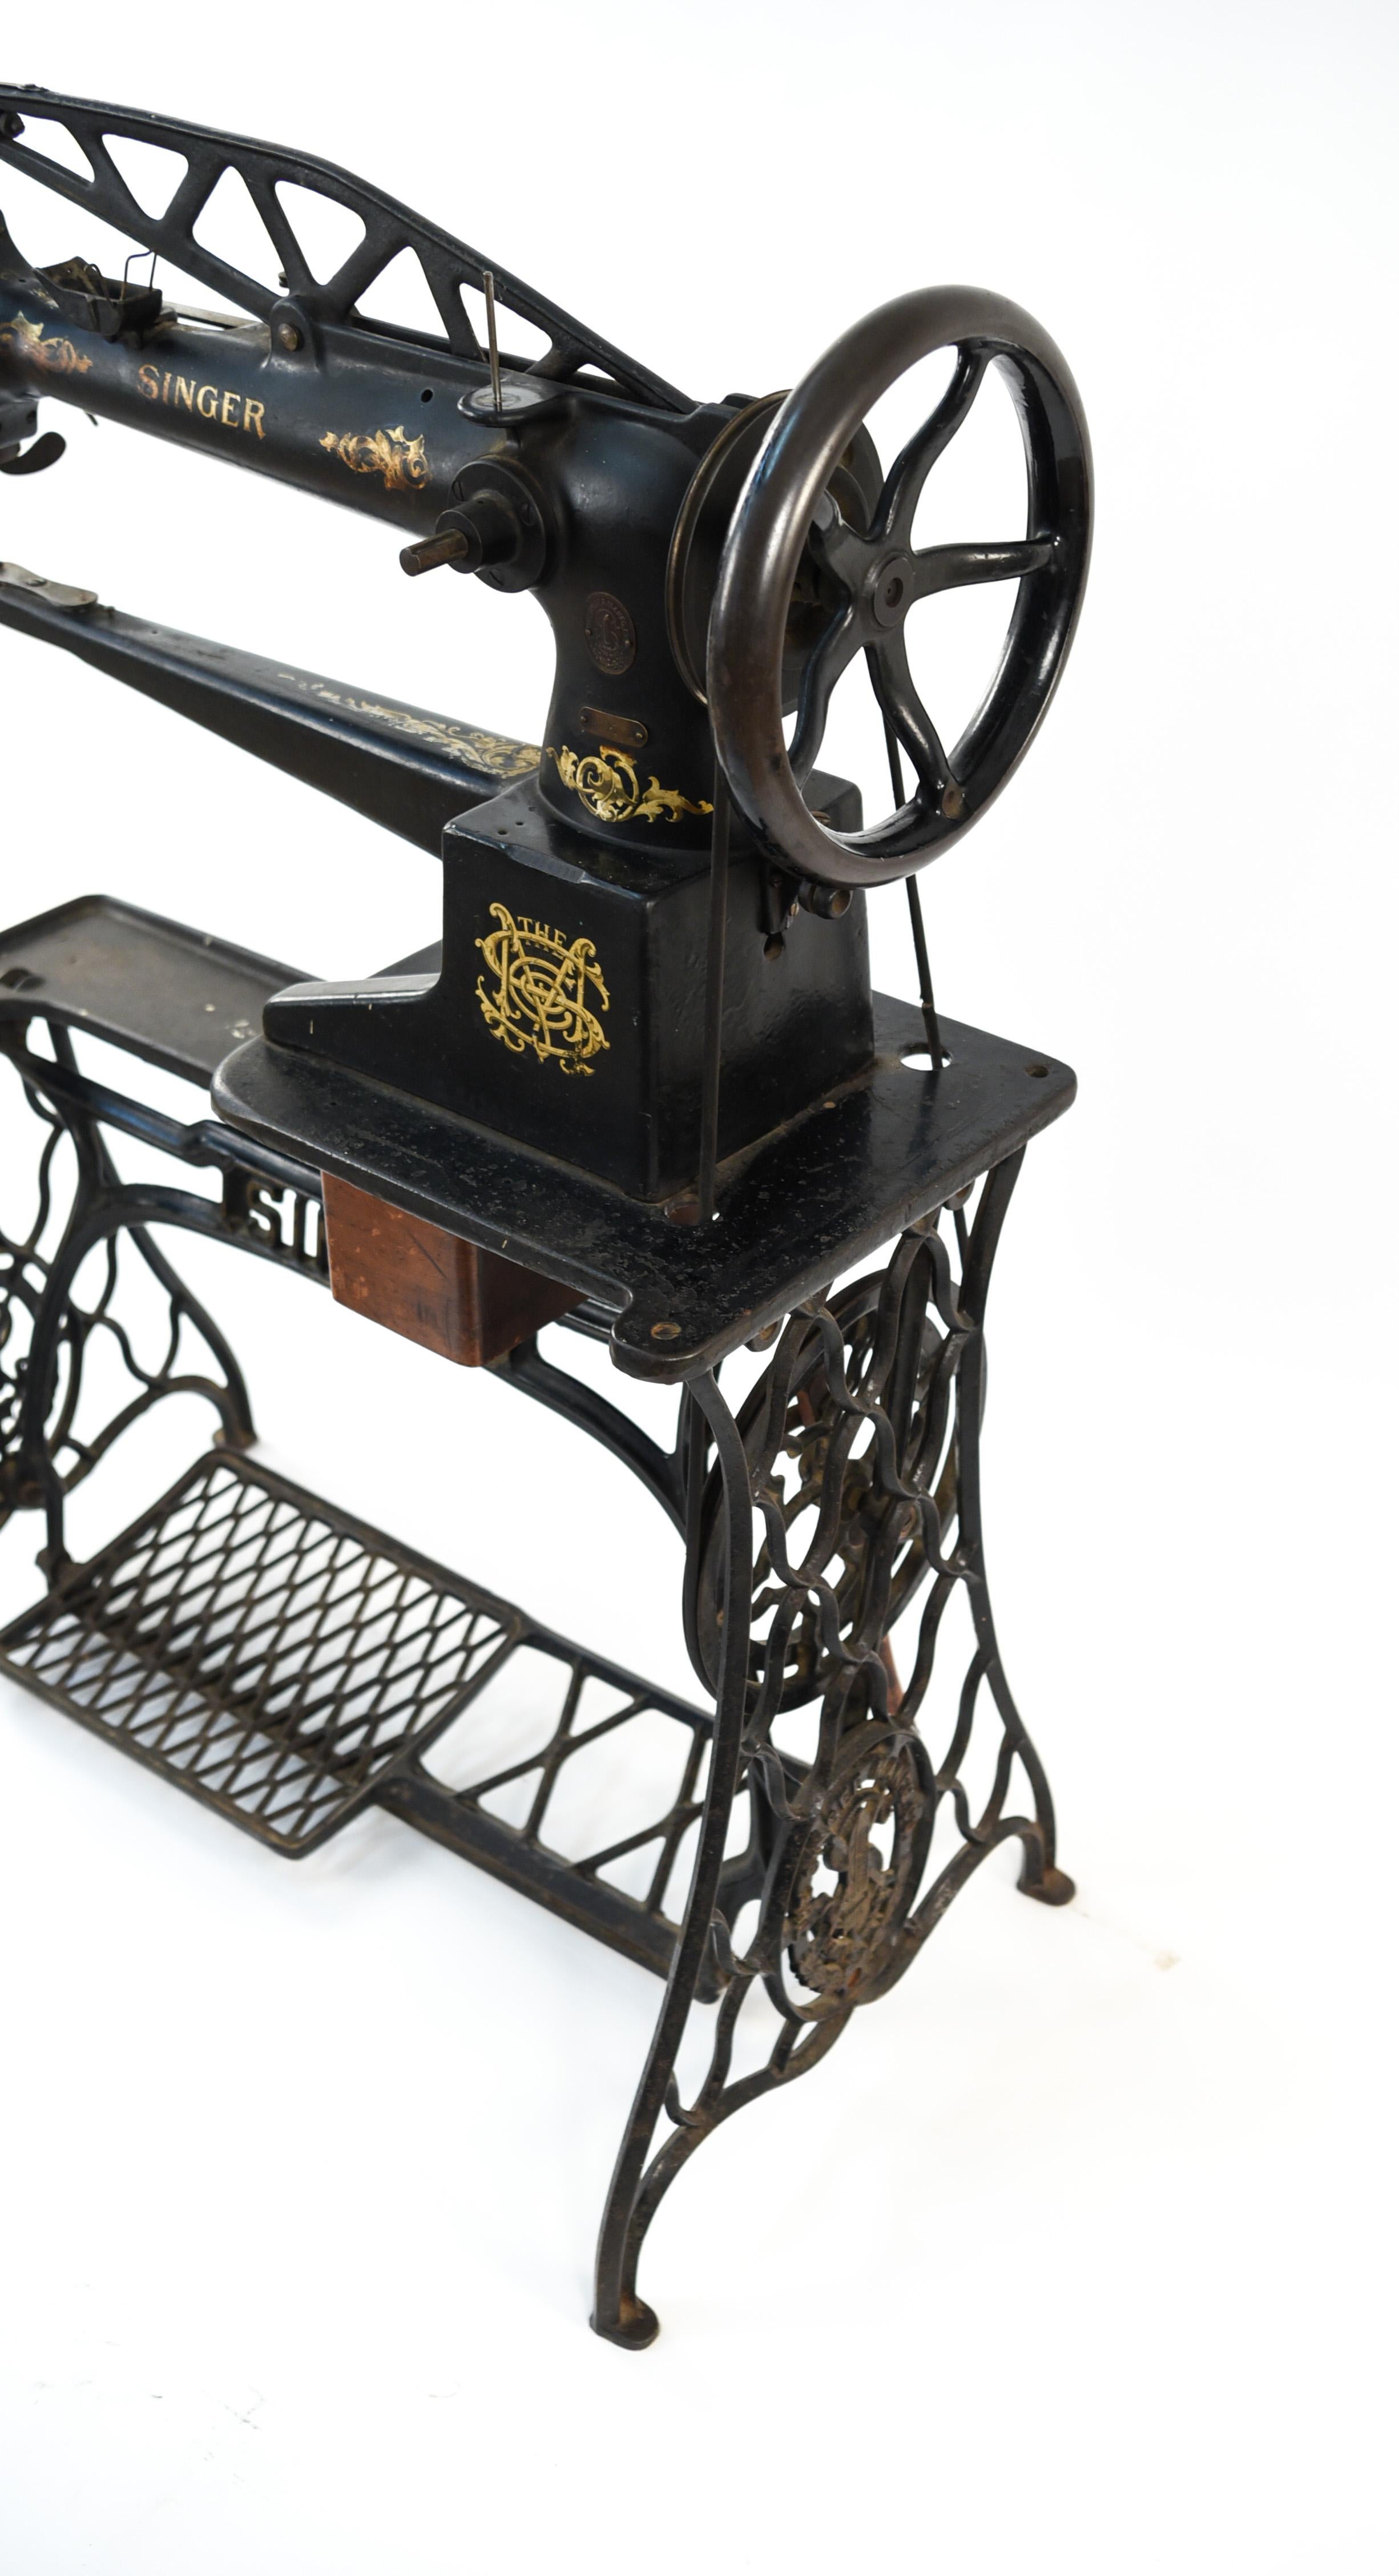 Antique Singer Leather Stitching Sewing Machine 4